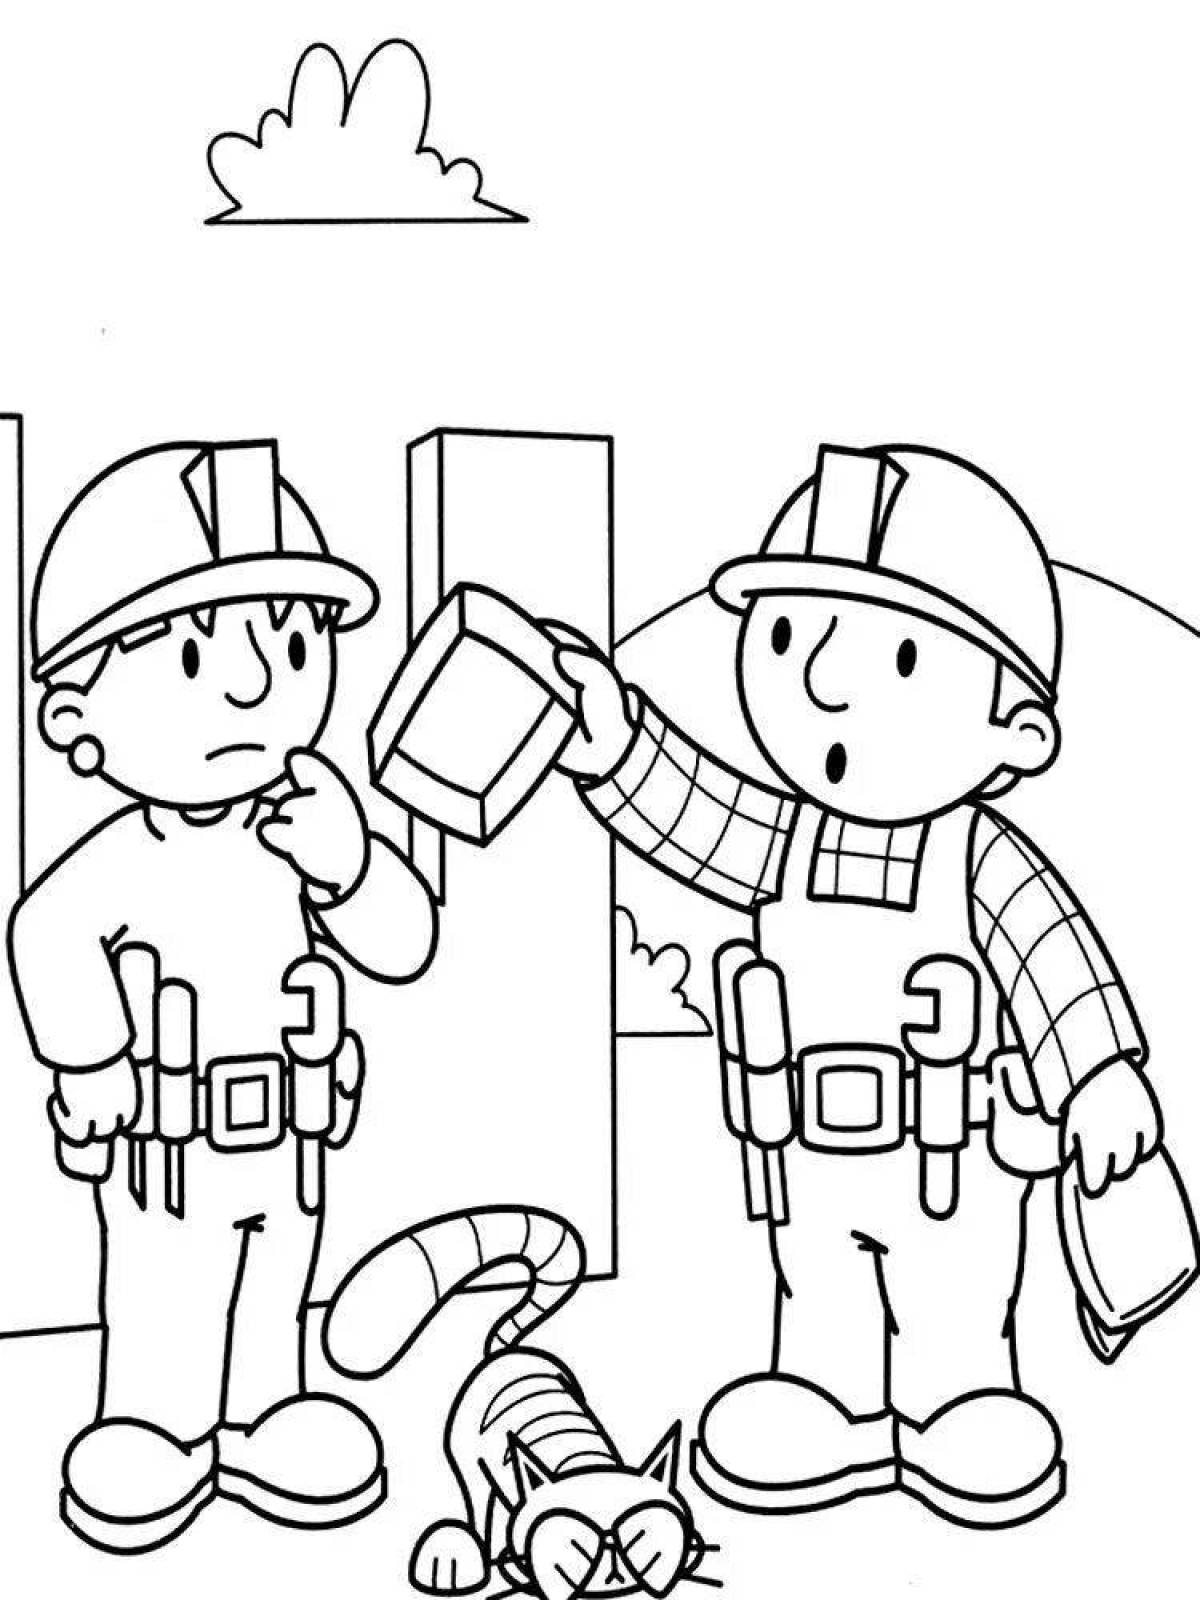 Occupational safety through the eyes of children #24